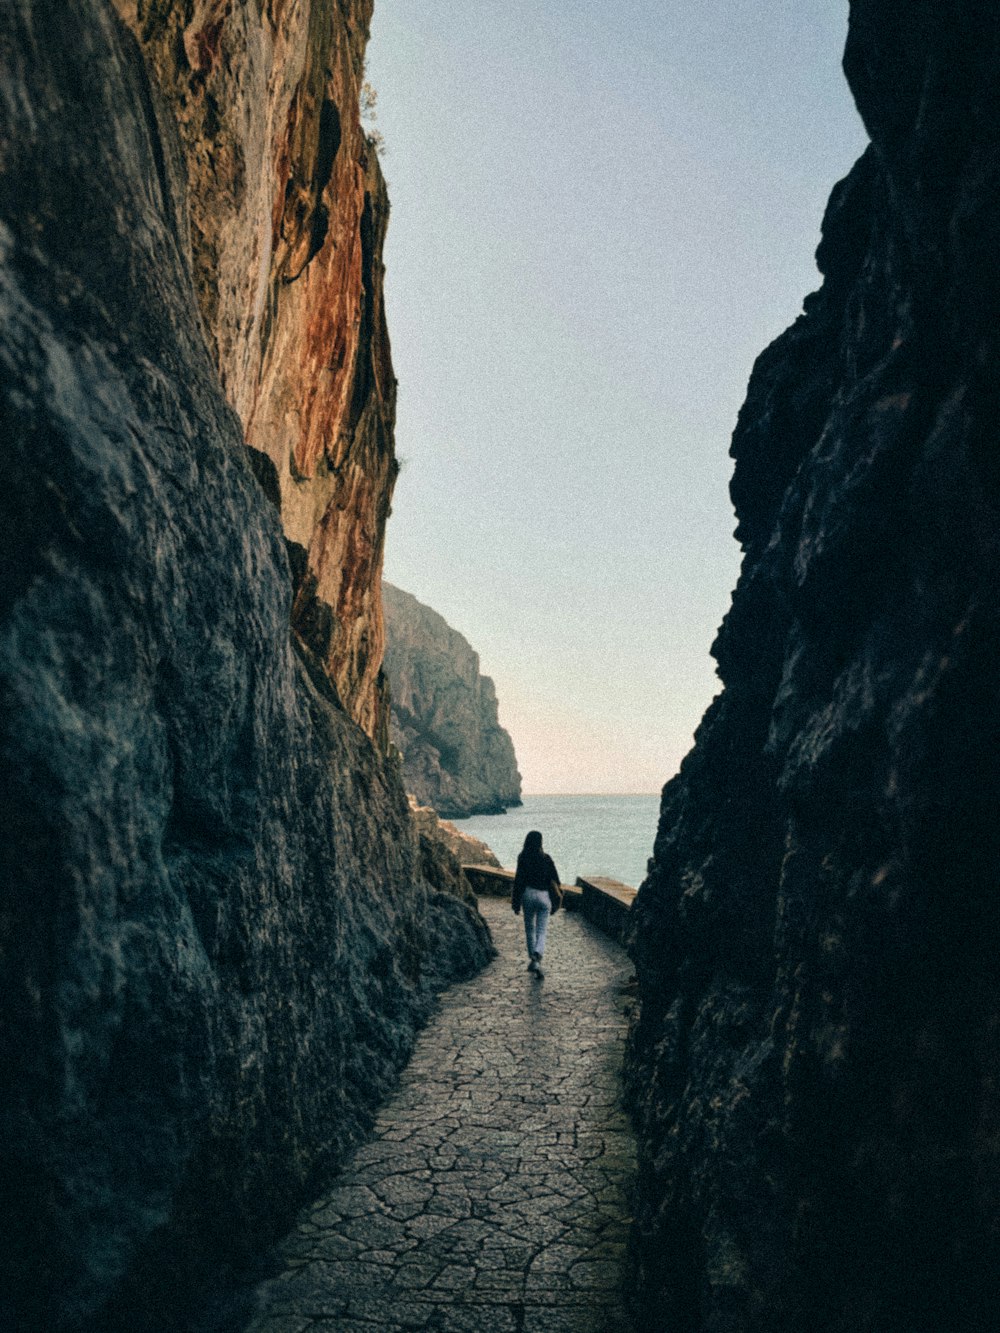 a person walking on a stone path between large rocks